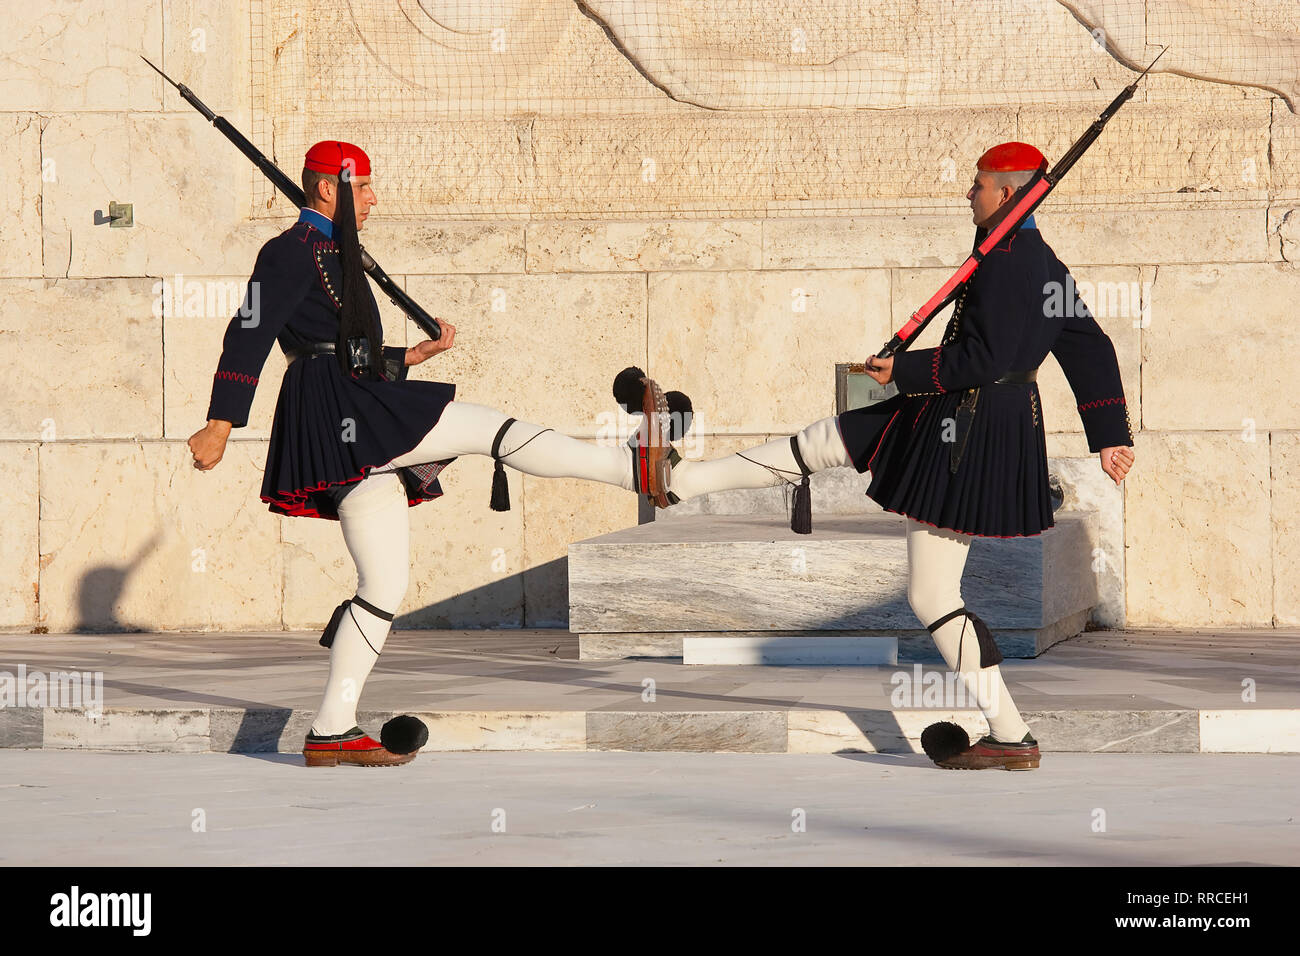 Greece, Attica, Athens, Evzones Greek soldiers on parade outside the Parliament building. Stock Photo